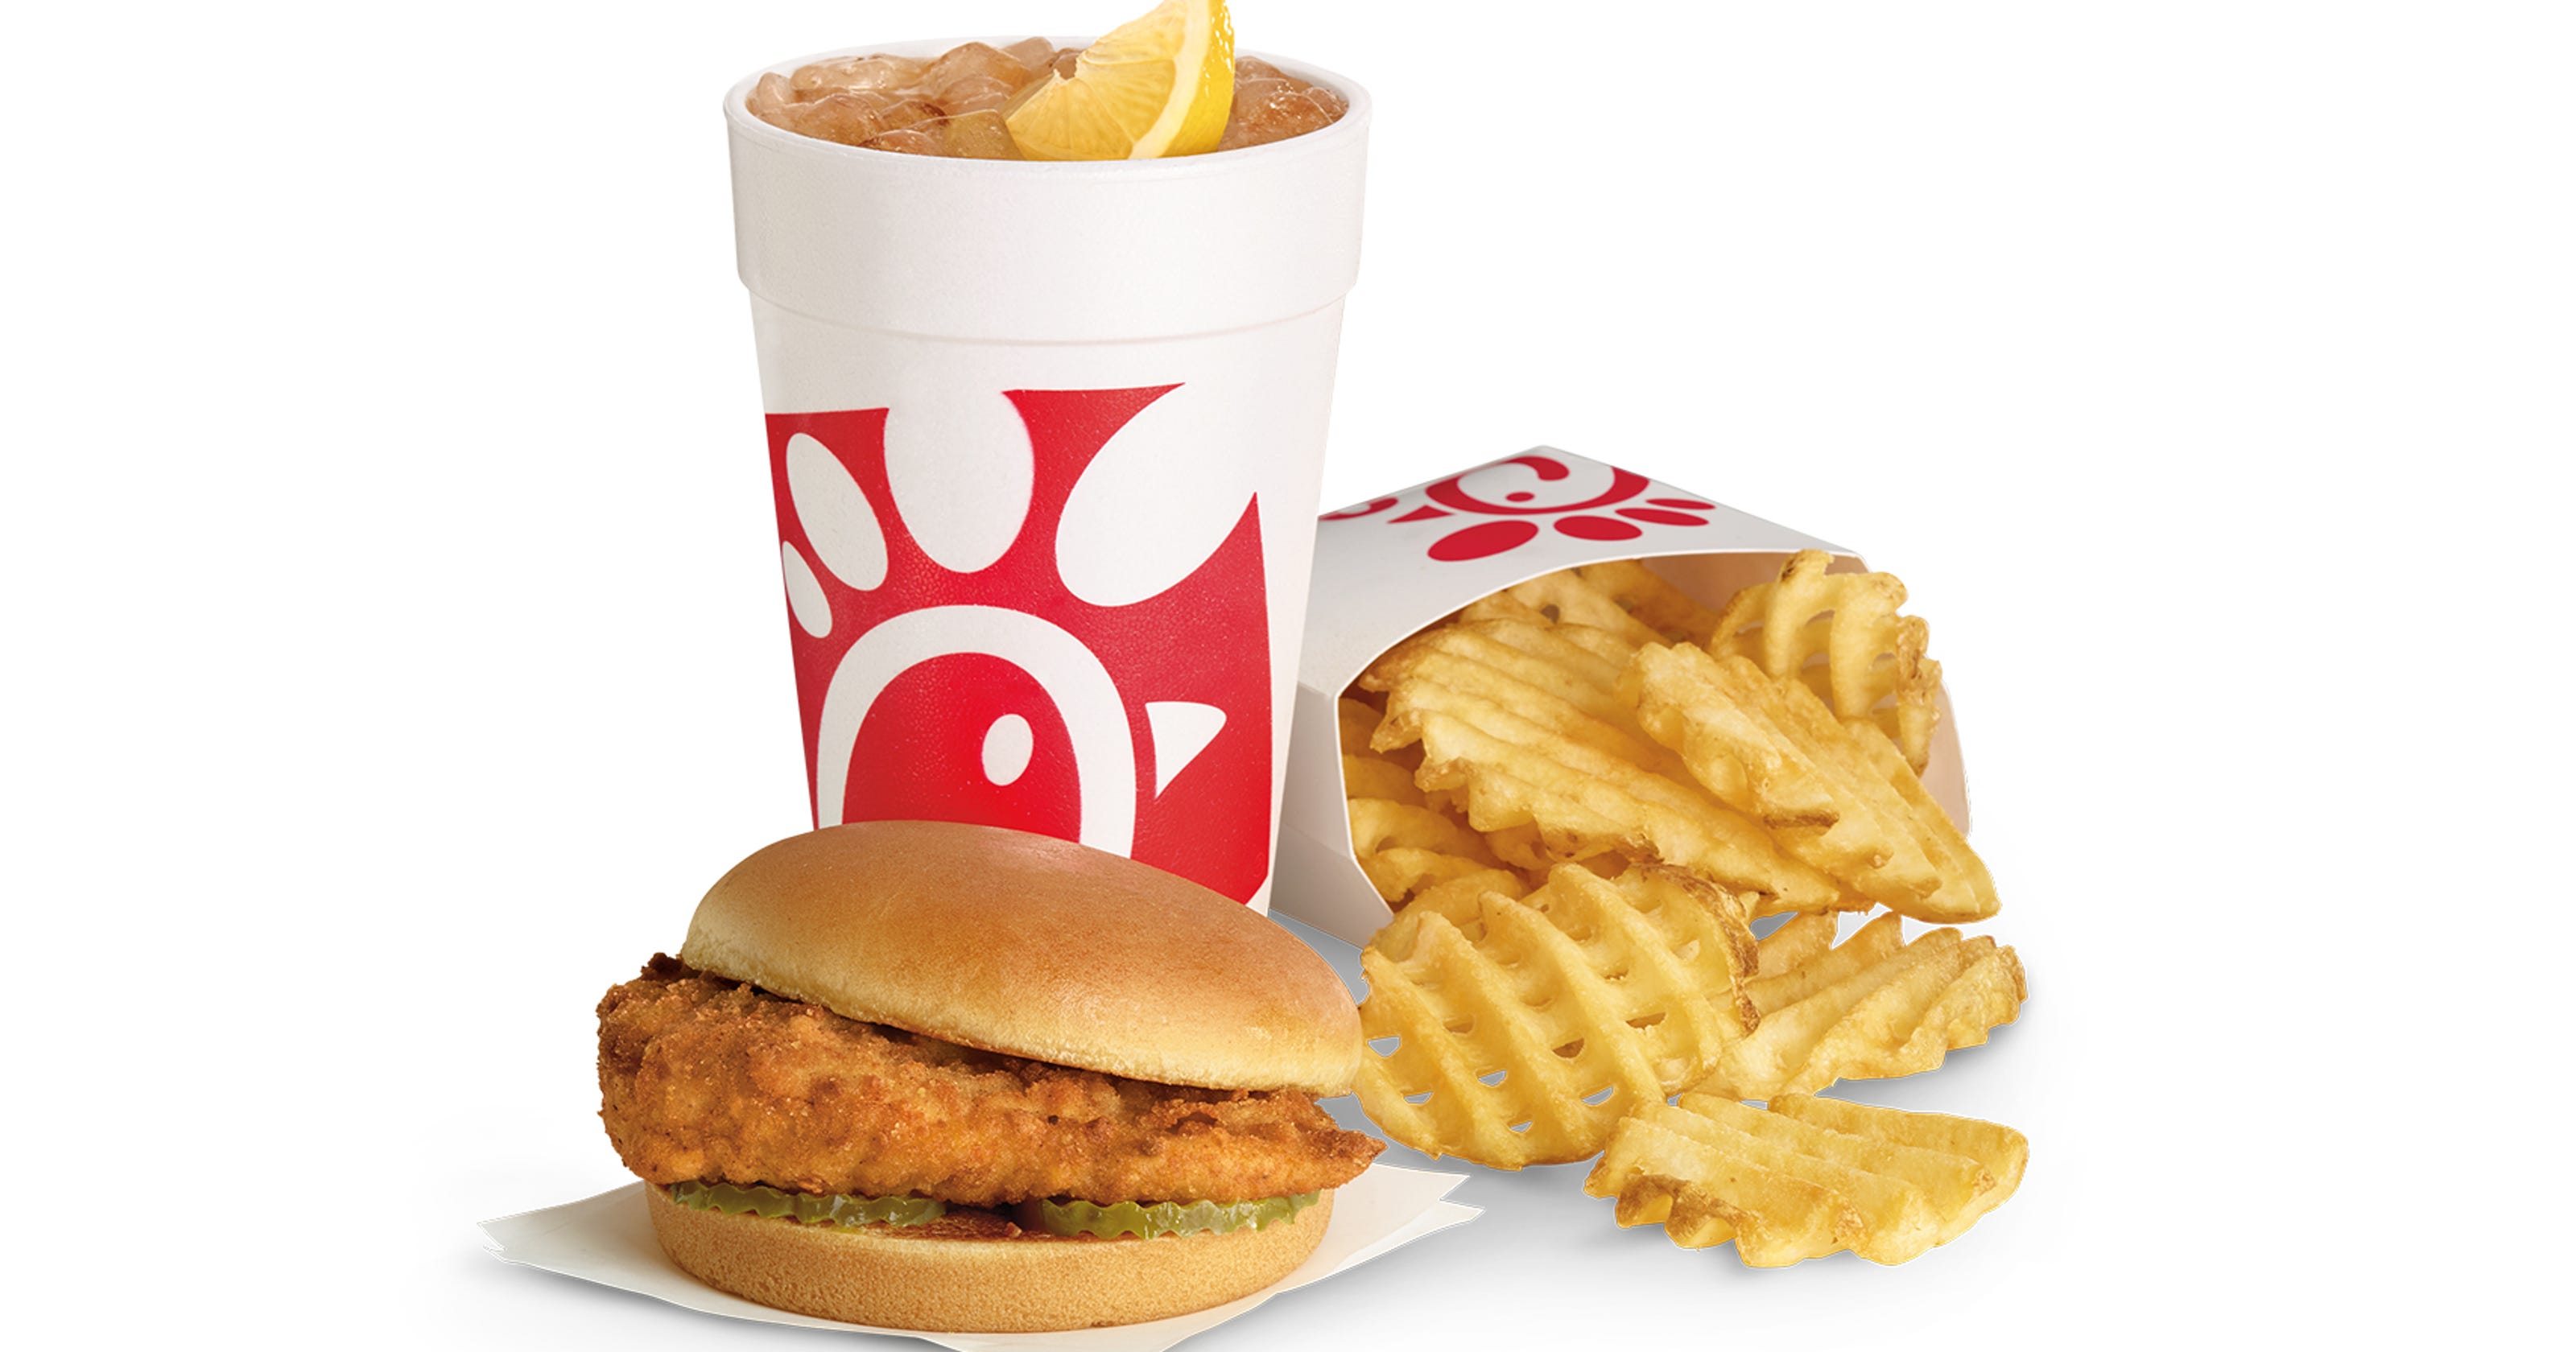 ChickfilA to open first Morris County location by February